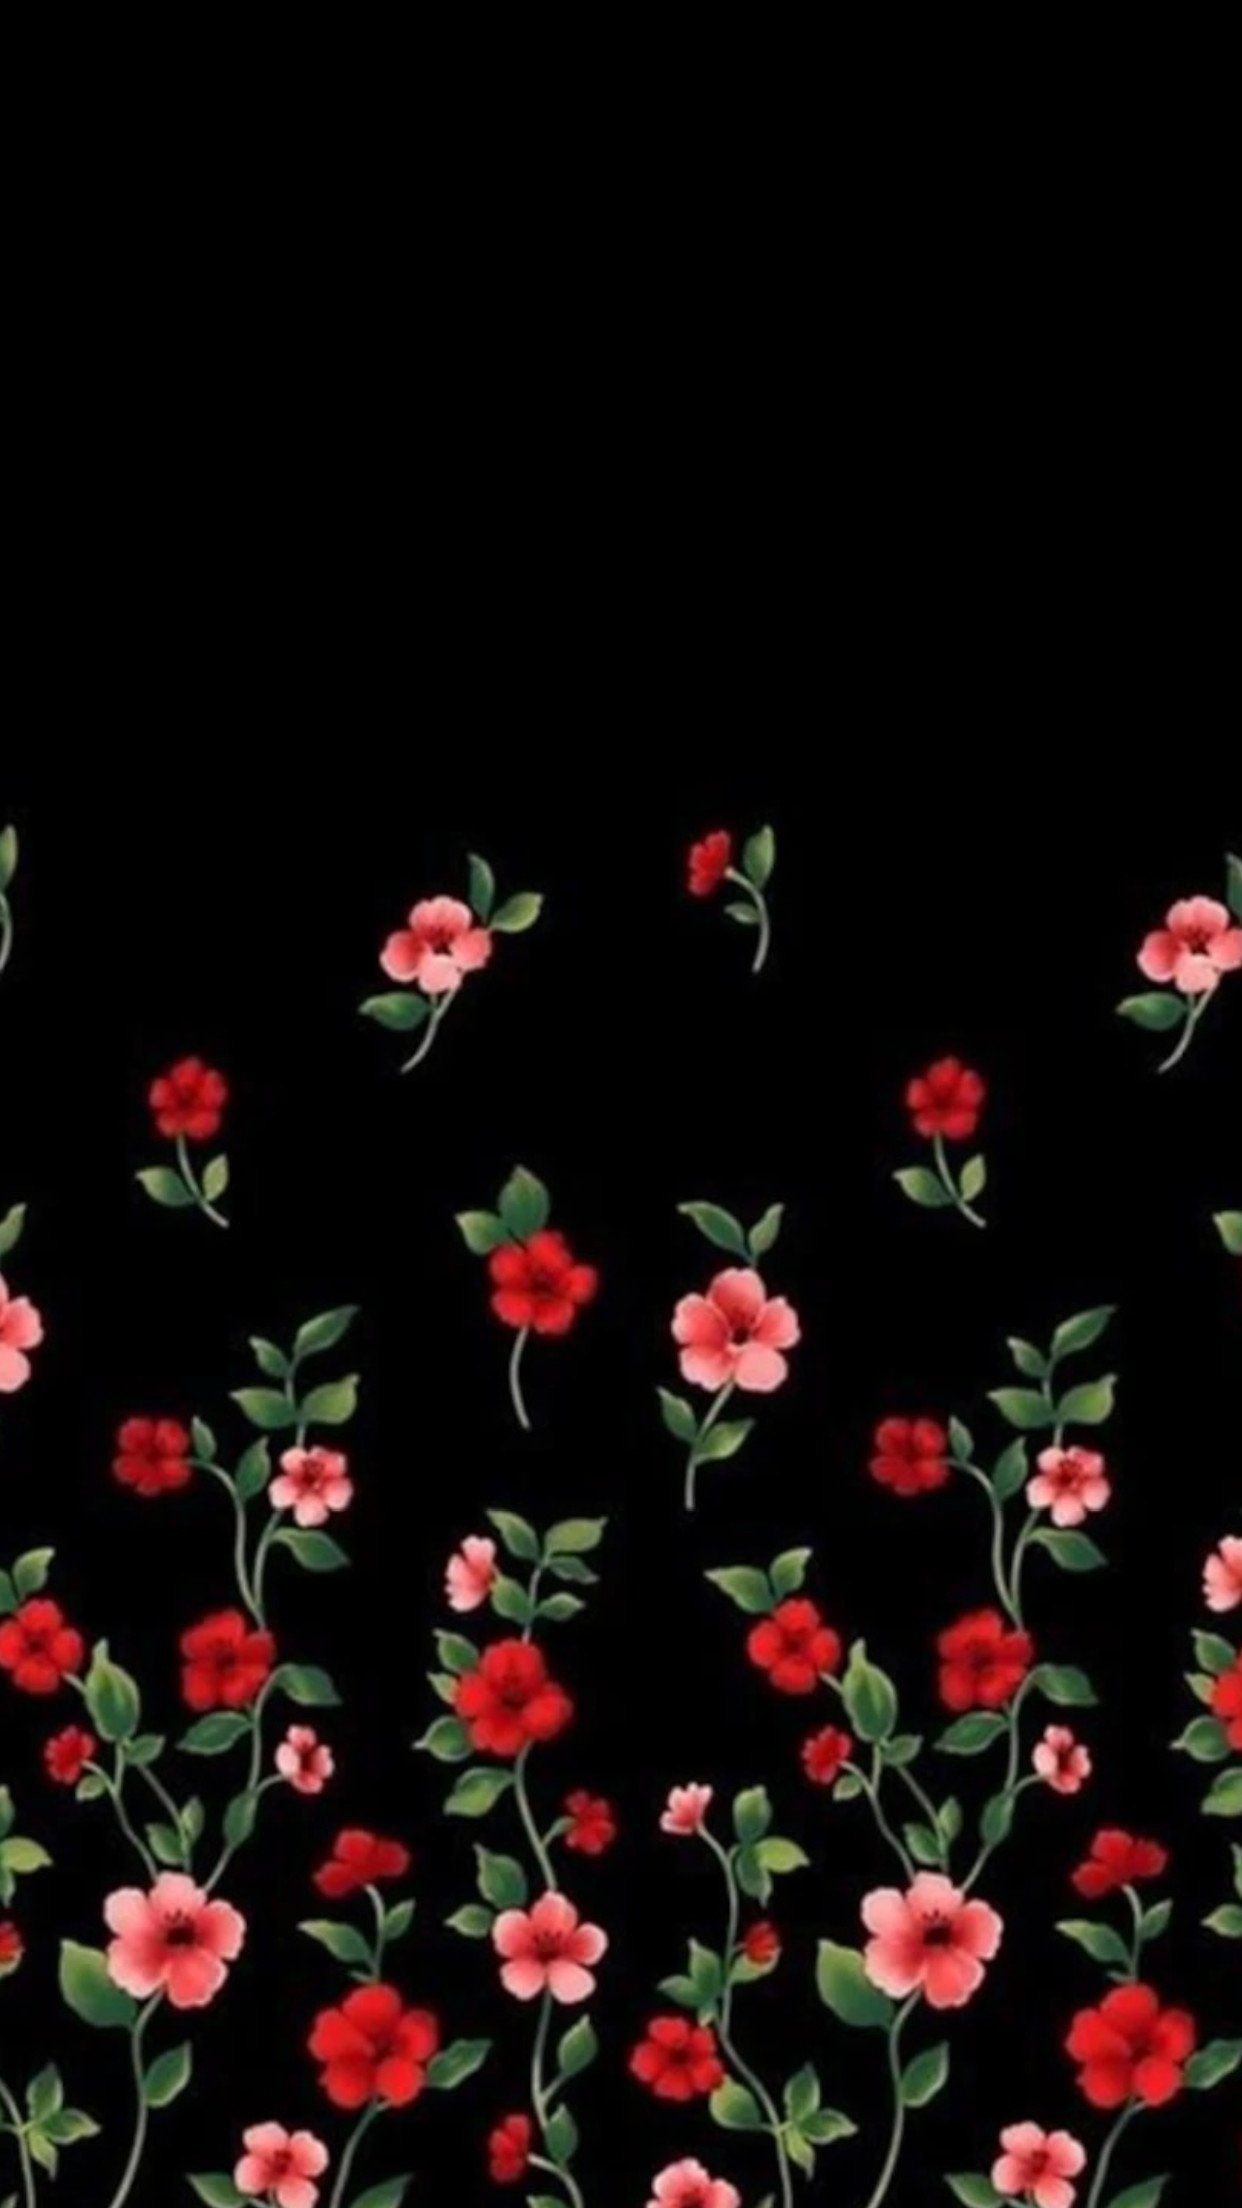 Background Photos - Love & friendship, #32927 | Flowers black background,  Red roses wallpaper, Dark red roses